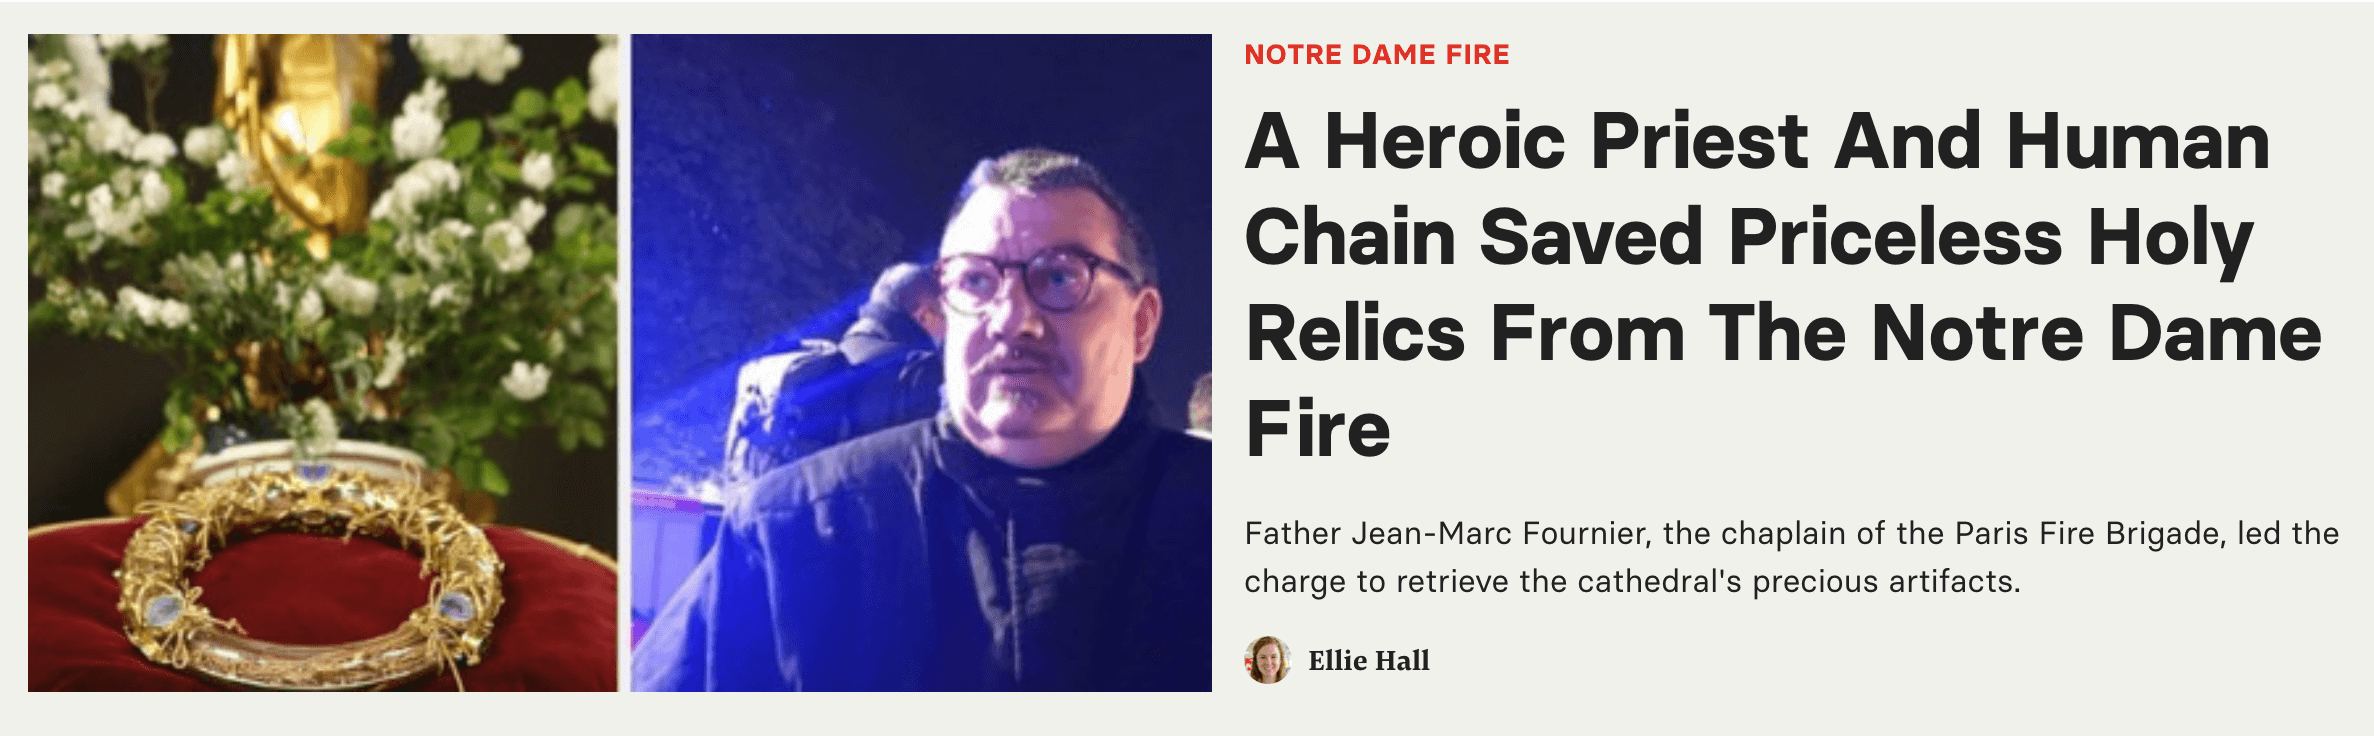 A headline about a priest who rescued relics from the Notre Dame Fire with help from a human chain.